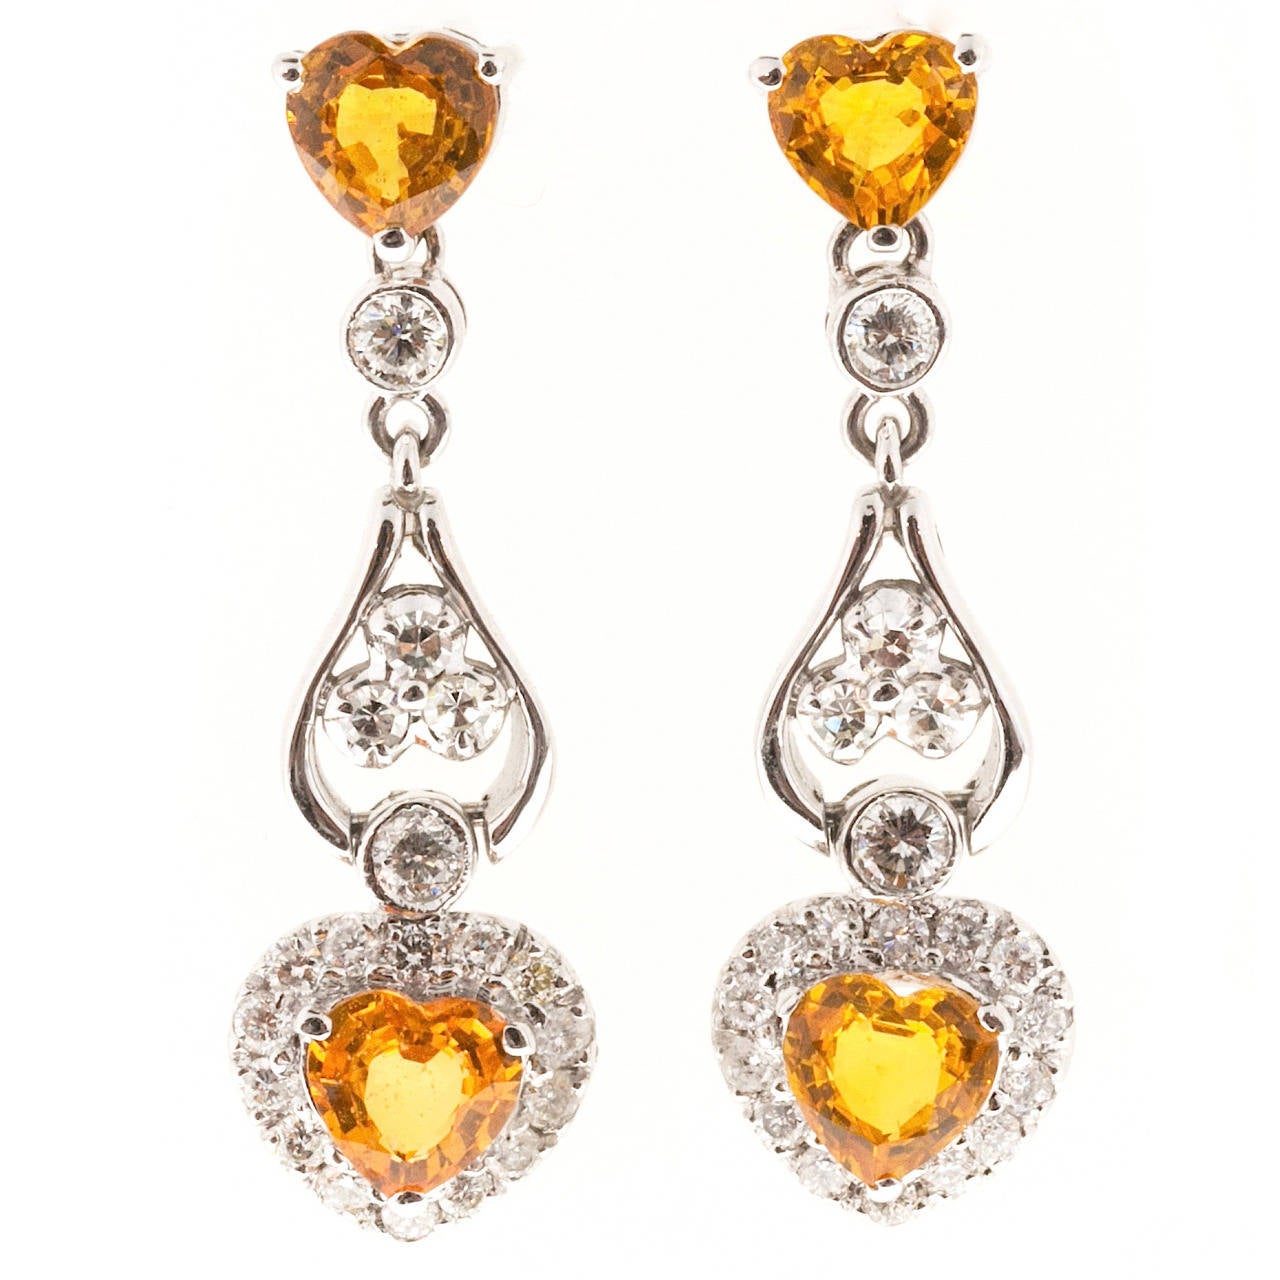 Yellow Sapphire Diamond Gold Dangle Earrings For Sale at 1stdibs